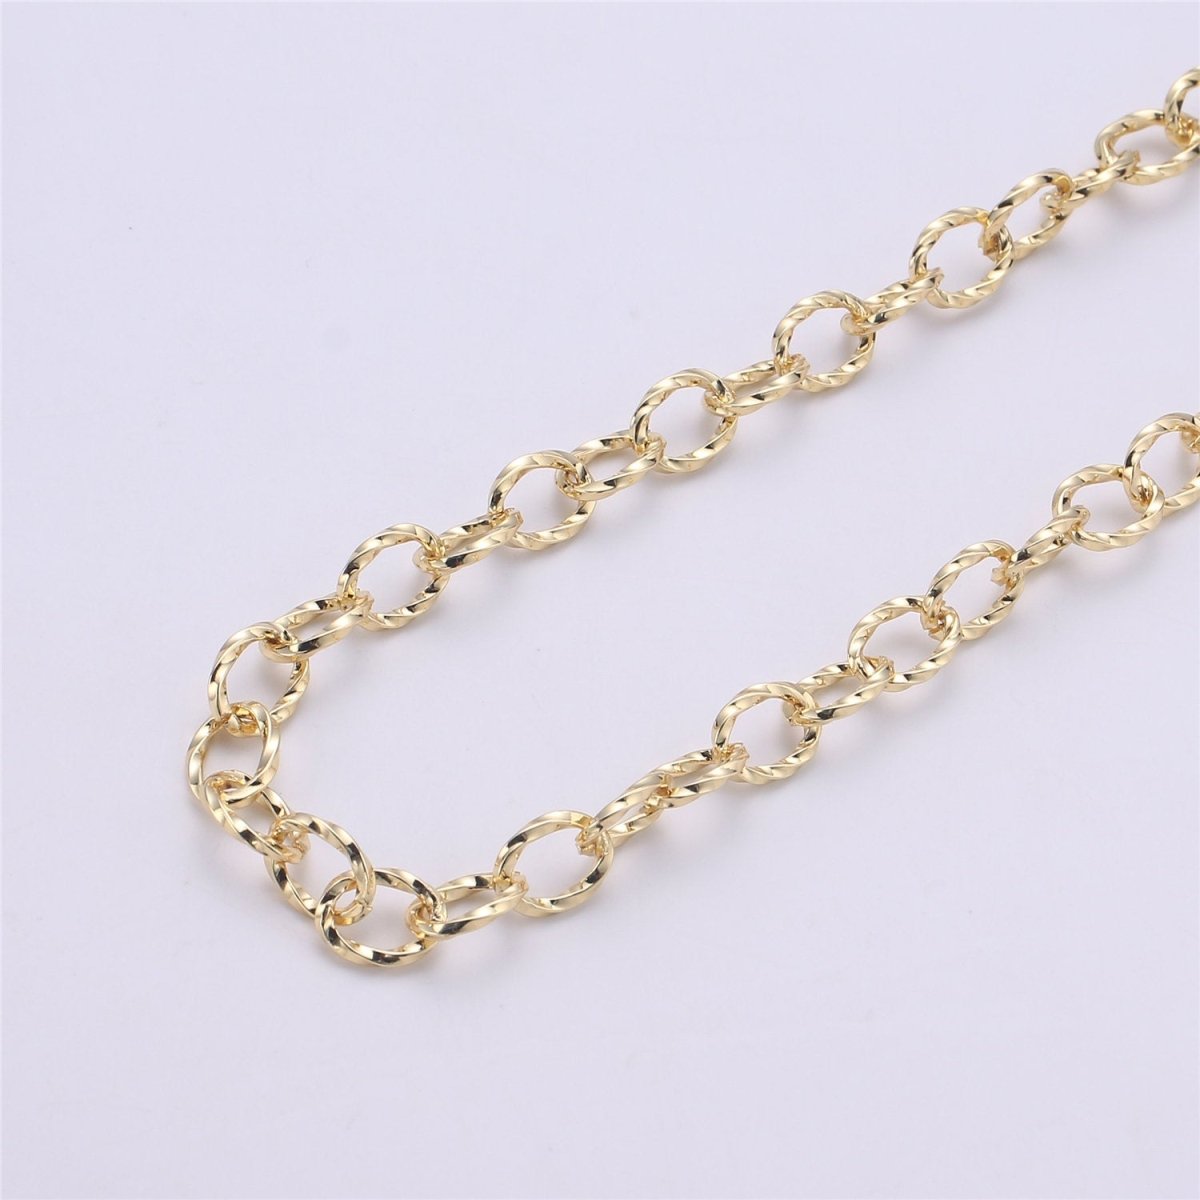 Modern Cable Chain By Yard, Nickel Free, 1 Yard 10X8mm Link, 24K Gold Filled Brass, Thick Oval Link Chain, Textured UNIQUE ROLO Chain | ROLL-074 Clearance Pricing - DLUXCA